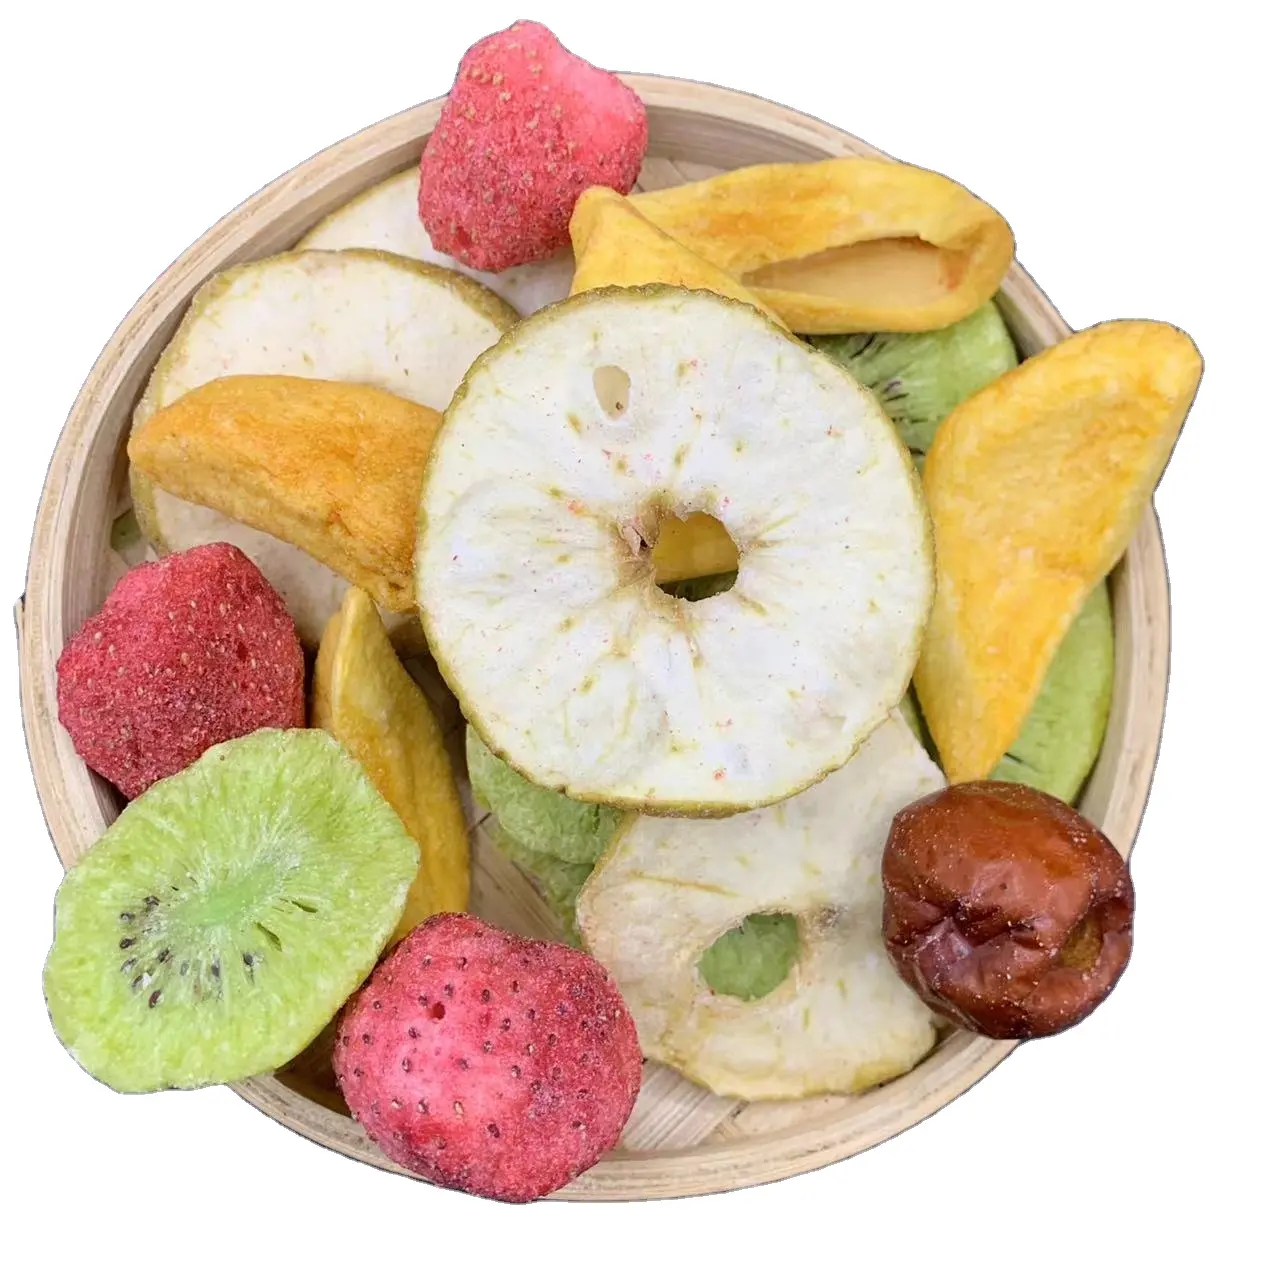 Healthy snacks dried fruits strawberries mangoes kiwifruit red dates vacuum frozen dried fruits and vegetables